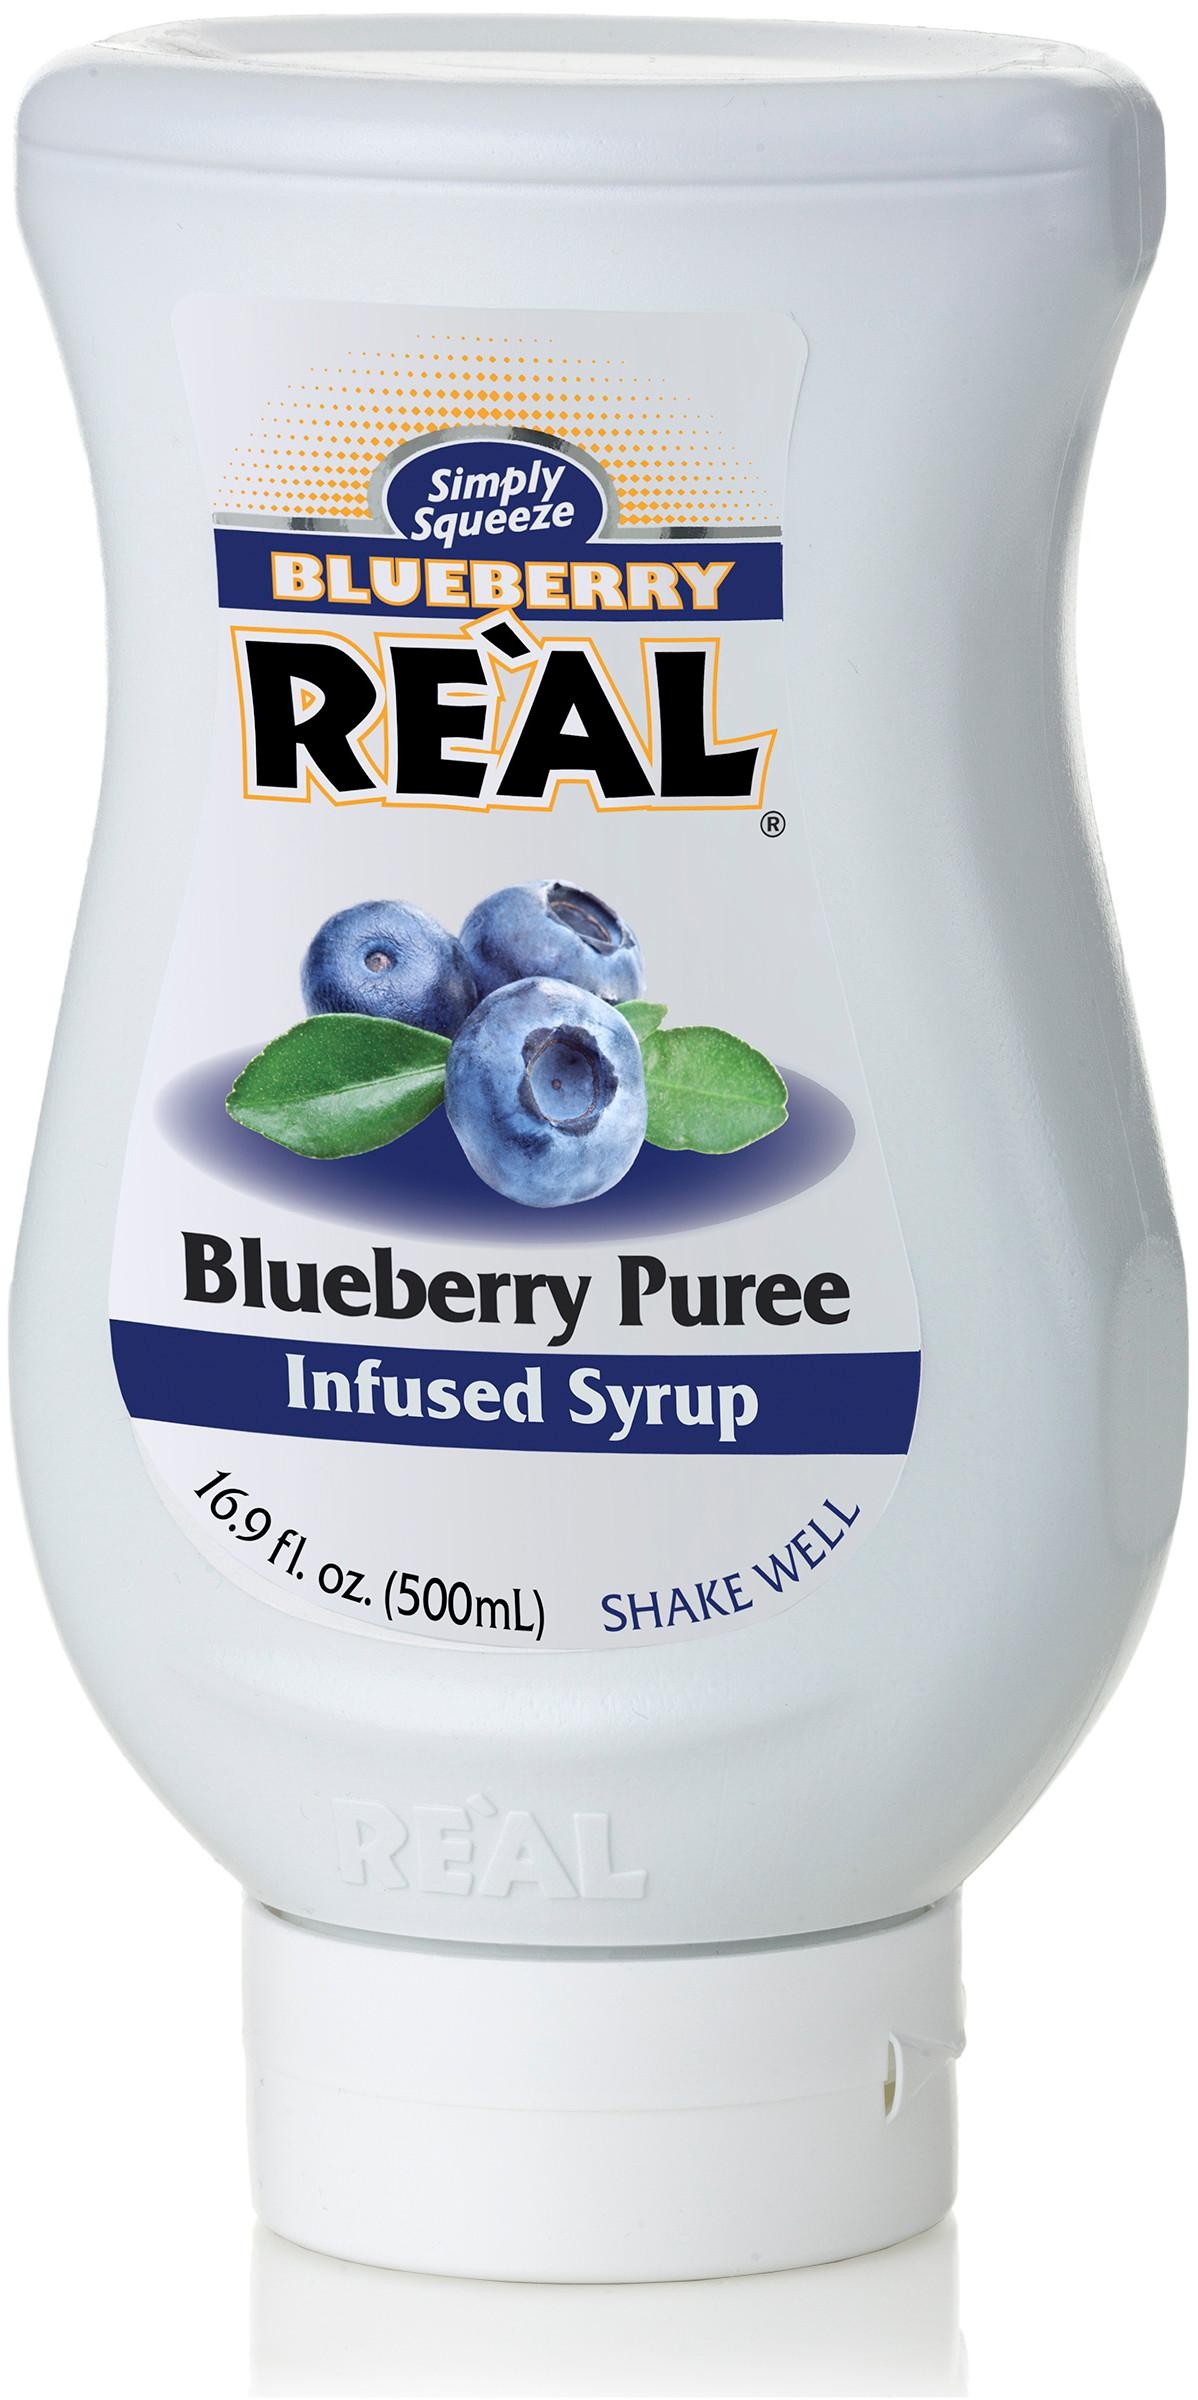 Real Blueberry Puree Infused Syrup 500ml